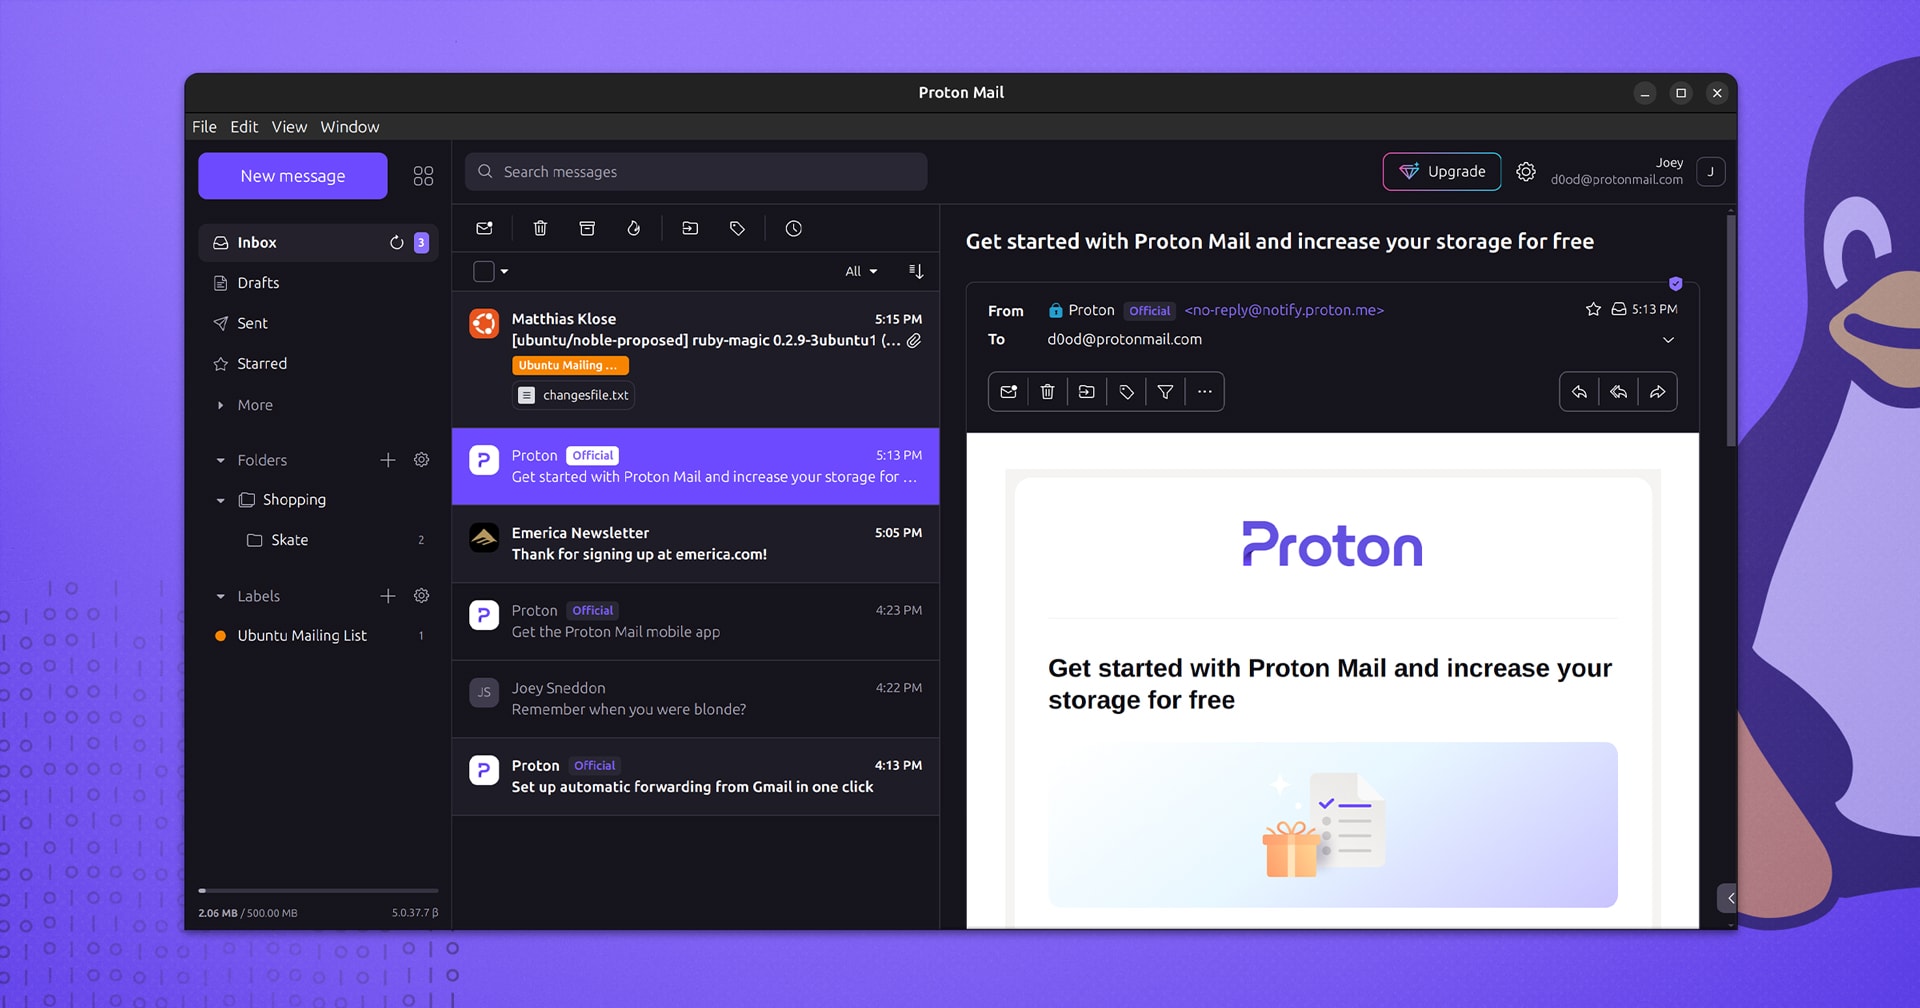 Proton Mail’s New Desktop App is Available for Linux